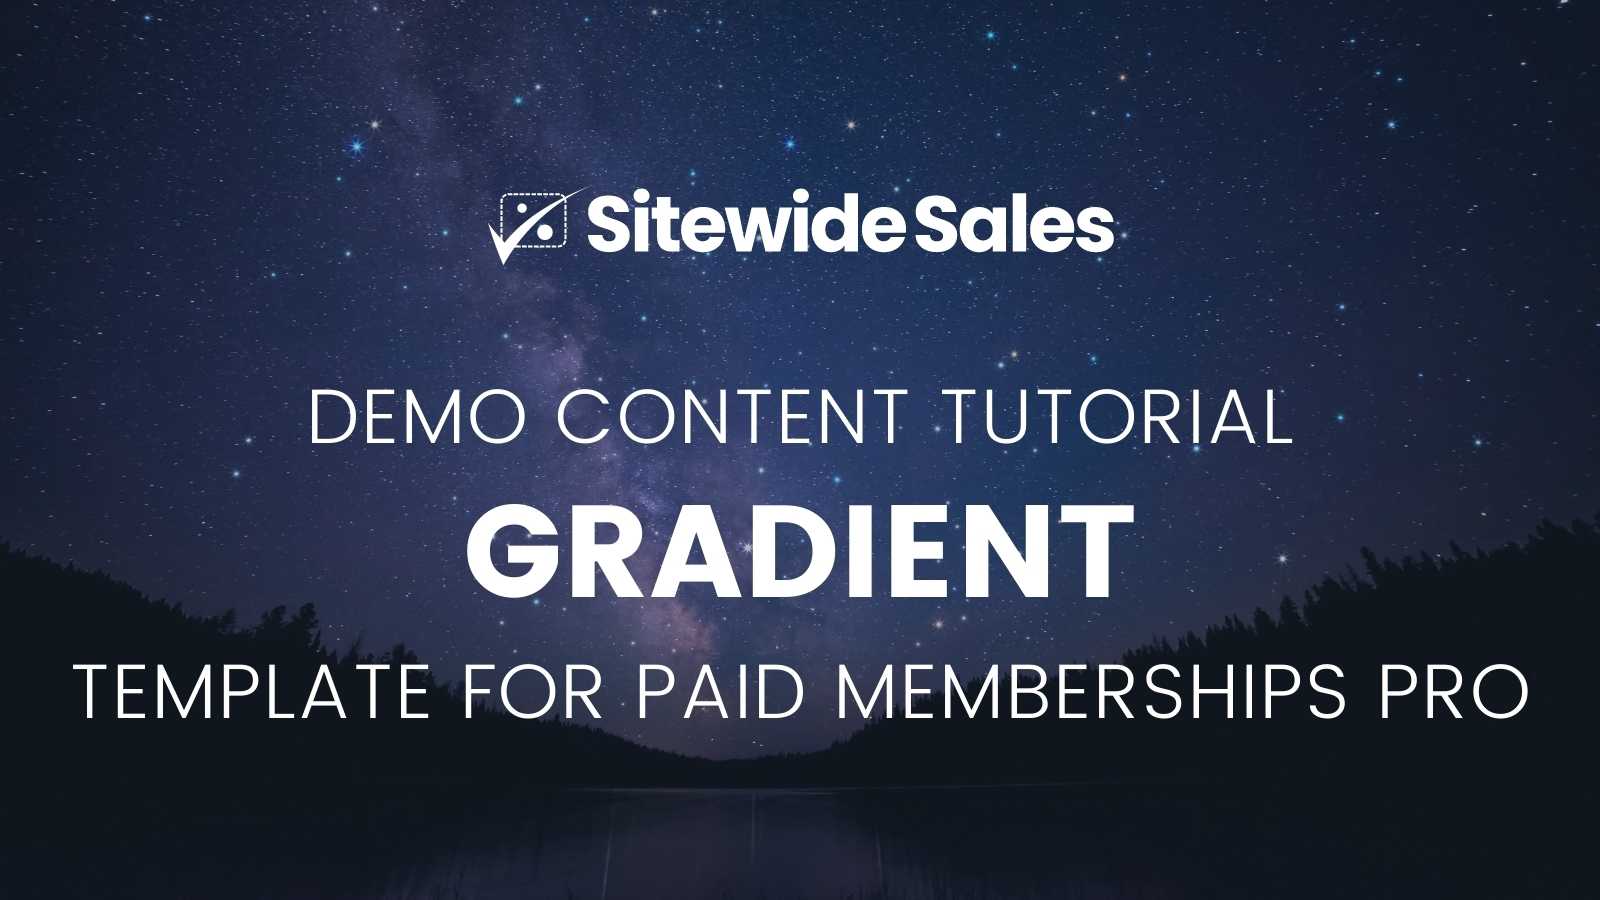 Gradient Template for Paid Memberships Pro: Sitewide Sale Demo Content